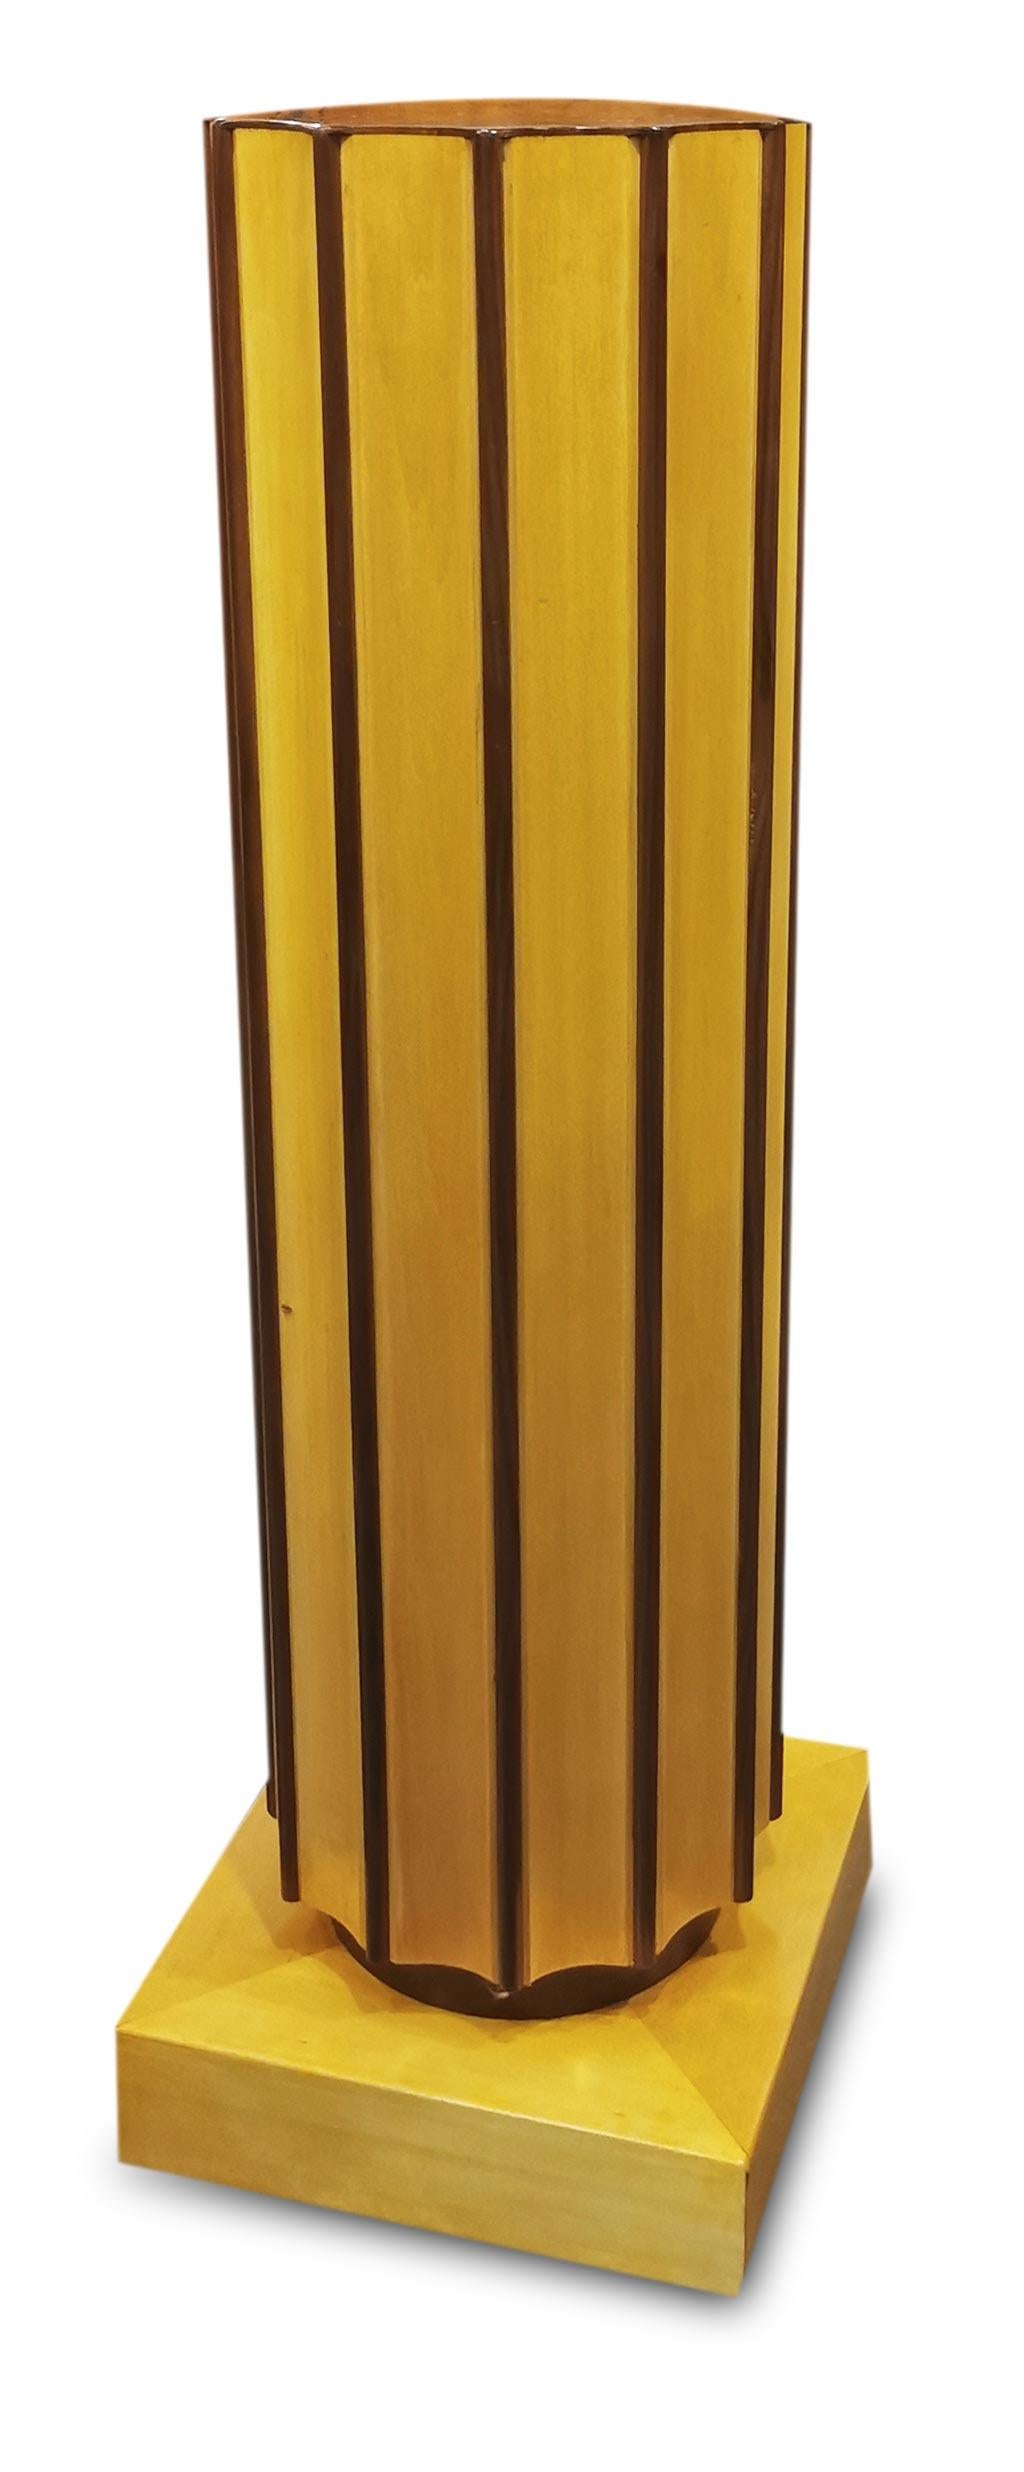 Elegant pair of fluted columns.
They rest on a parallelepiped and are veneered in maple and walnut wood.
the two woods with such different colors, light maple and brown walnut, create a truly unique color contrast.
Ideal for supporting a marble